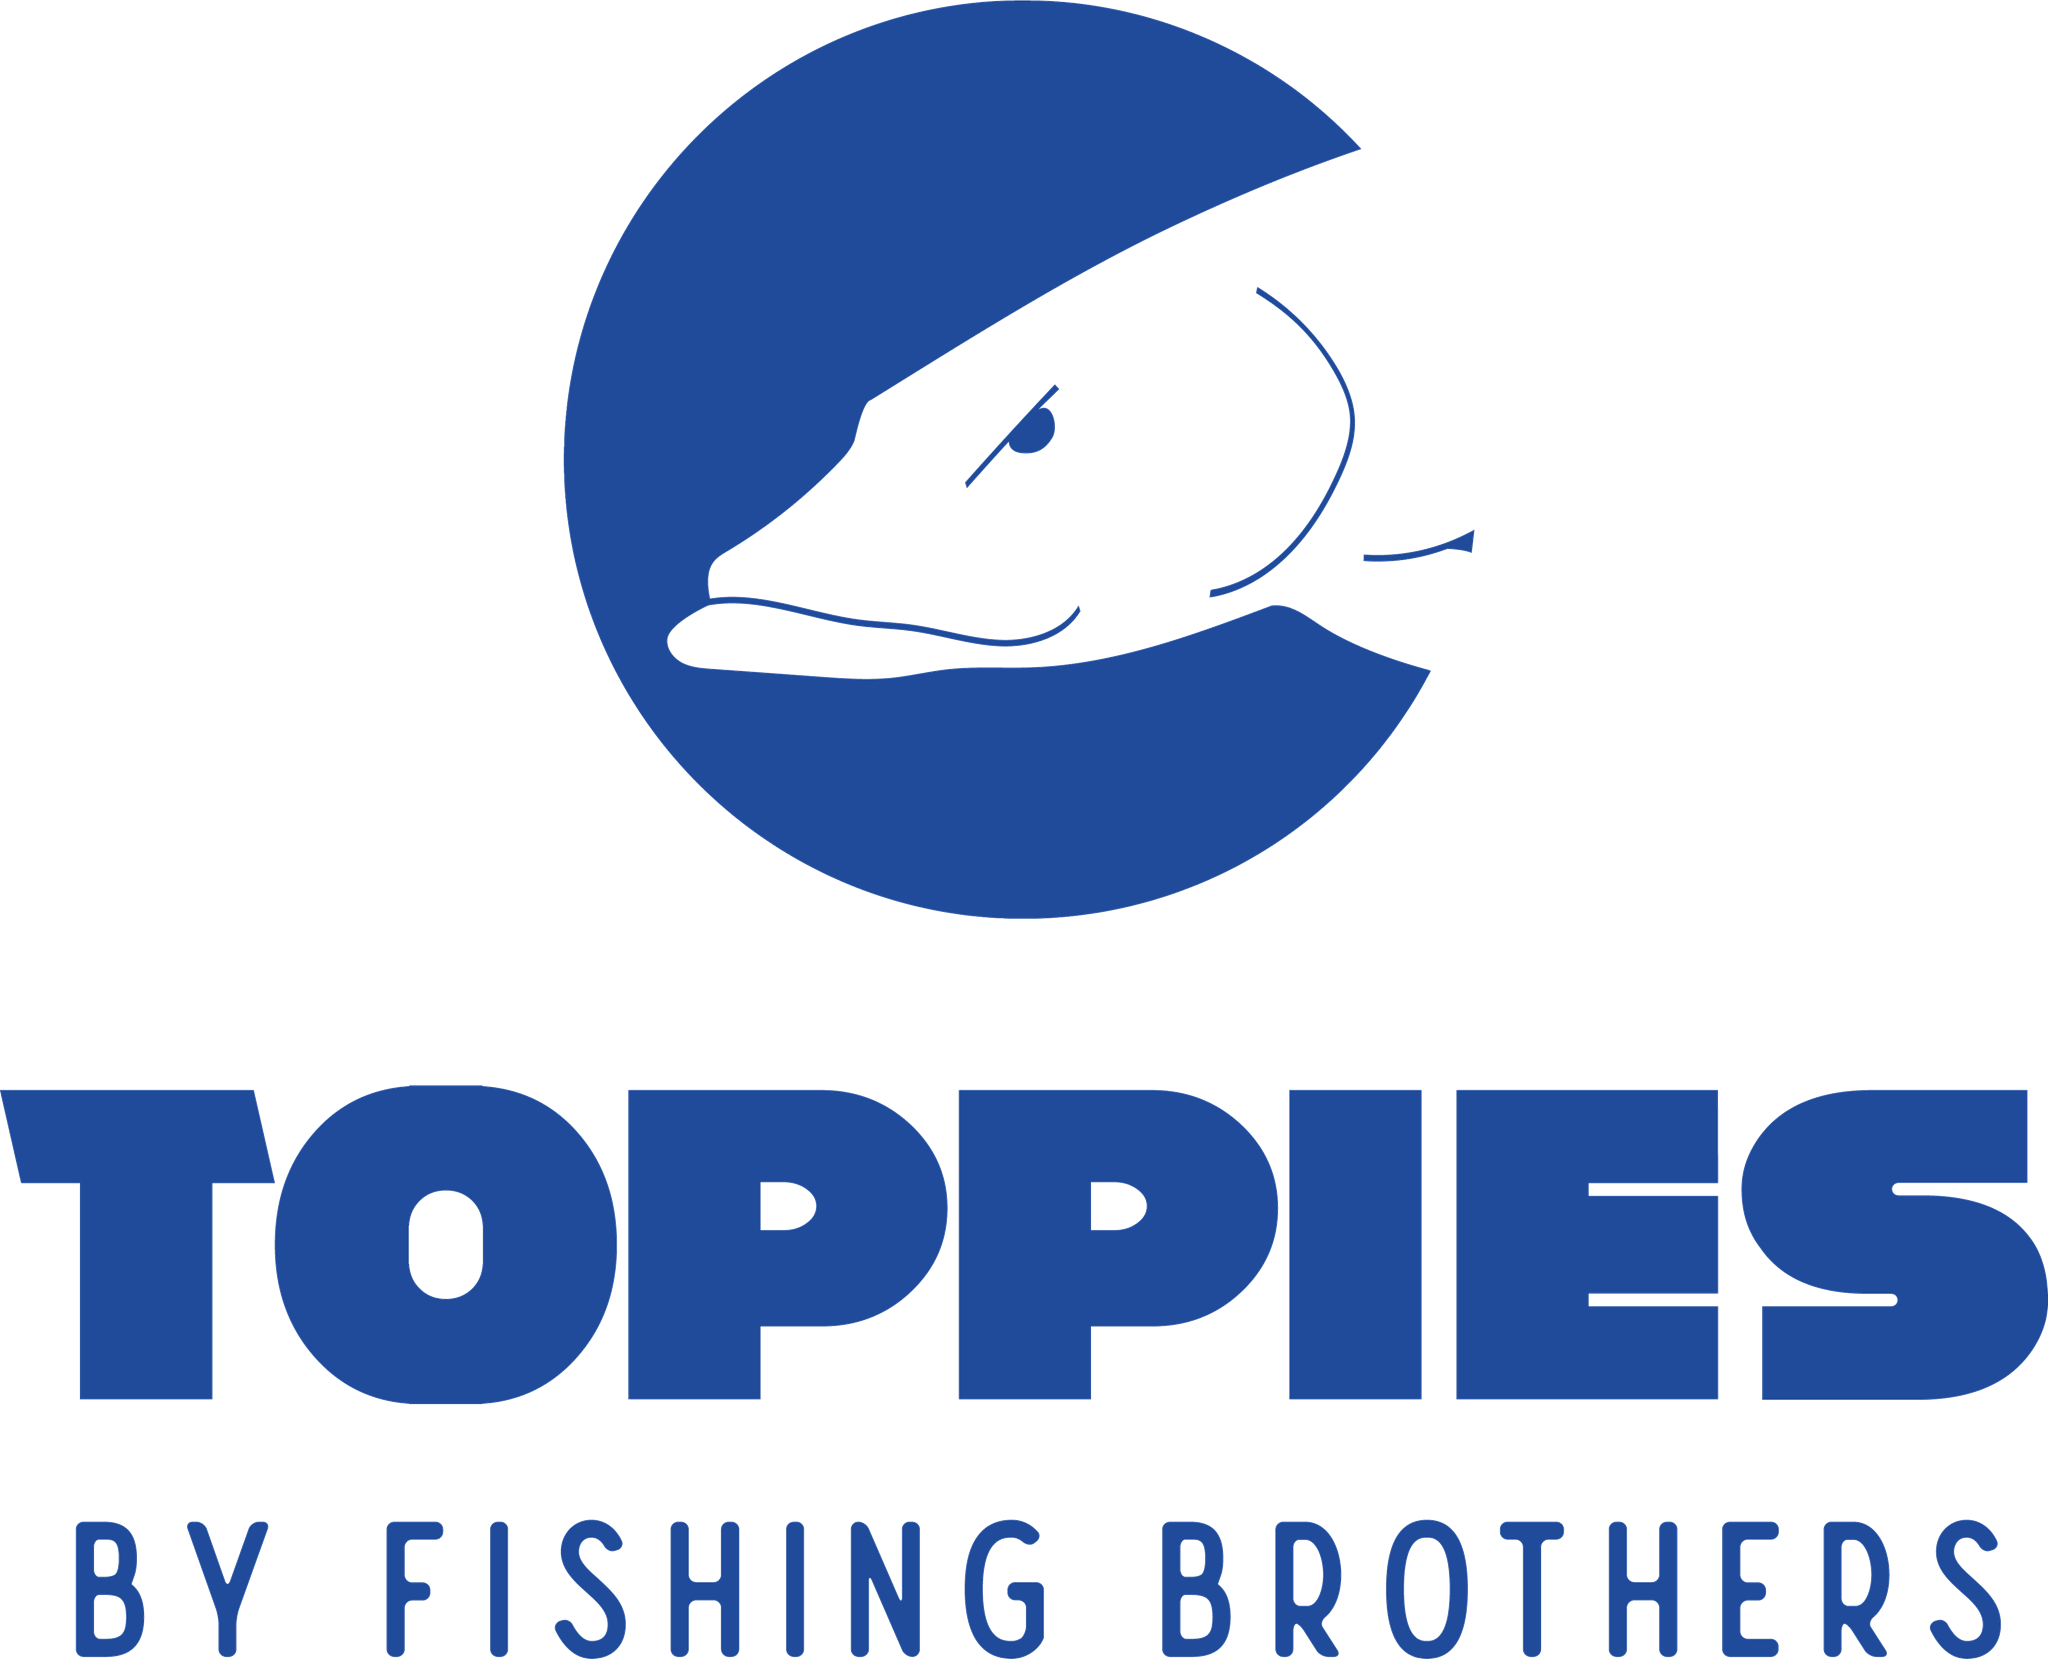 Afficher les images du fabricant TOPPIES BY FISHING BROTHERS